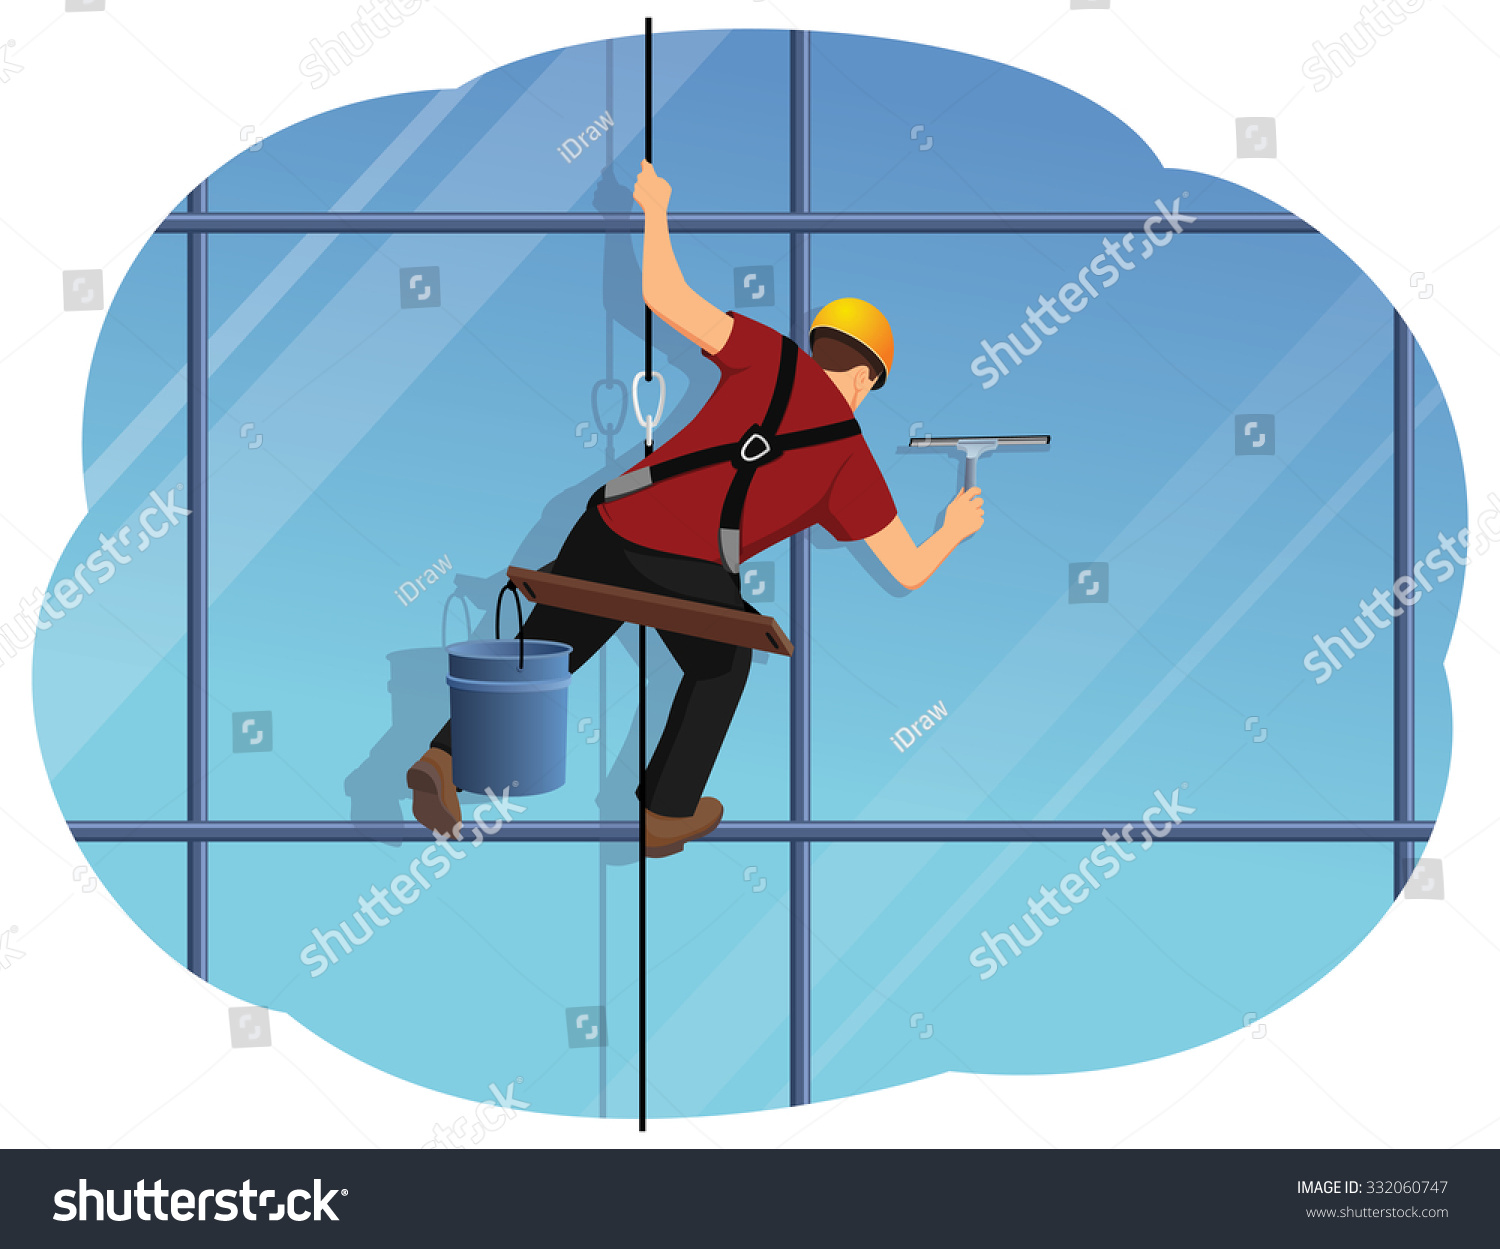 window squeegee clipart - photo #42